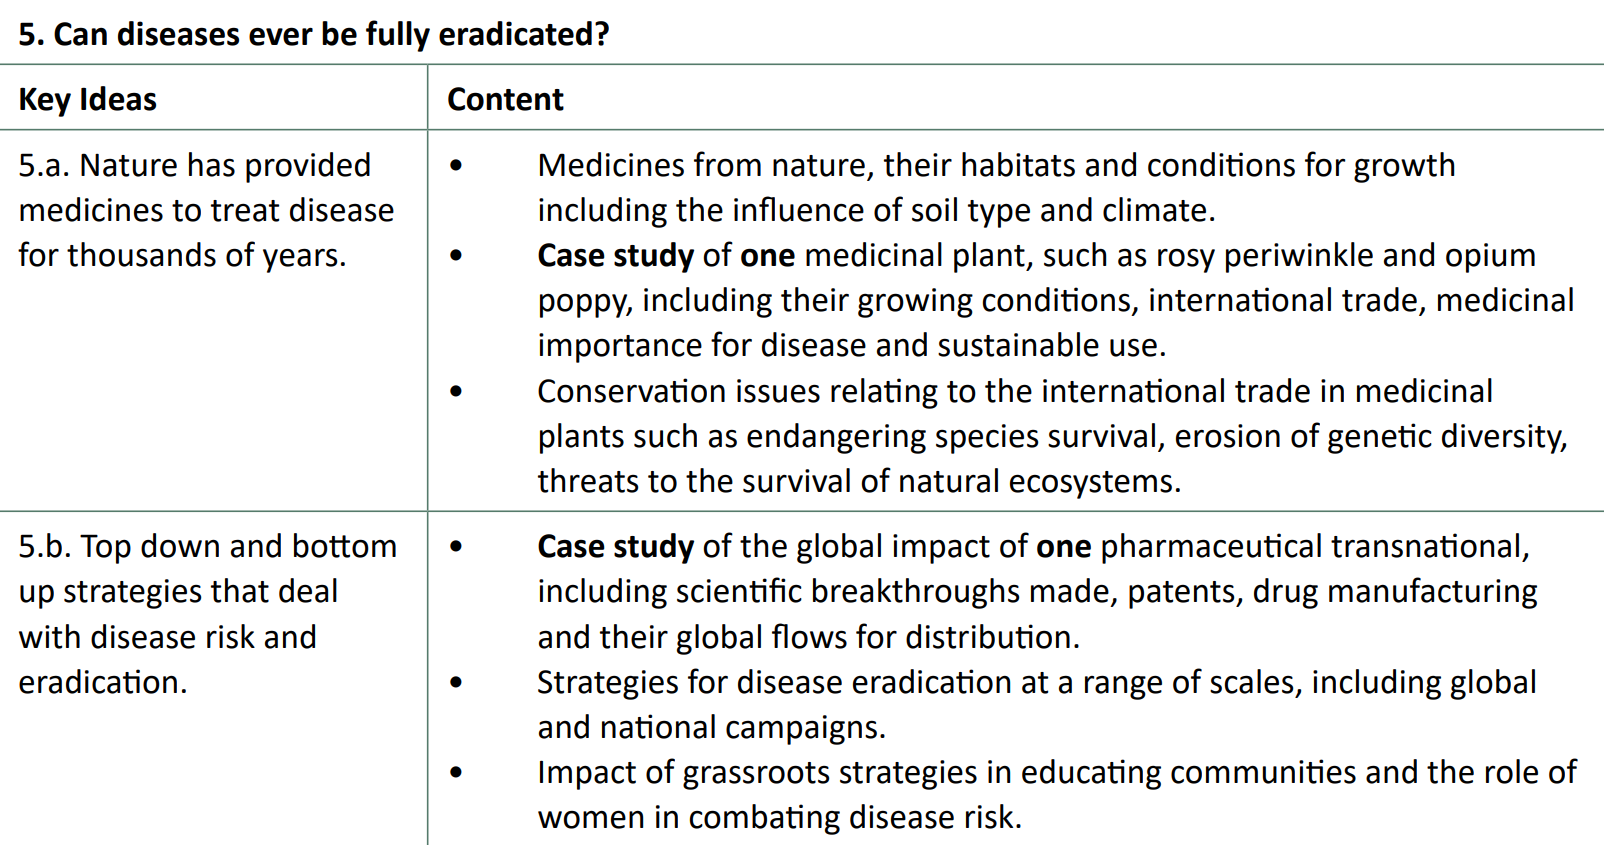 Specification Content for Disease Dilemmas Key Idea 5 - "Can diseases ever be fully eradicated?"